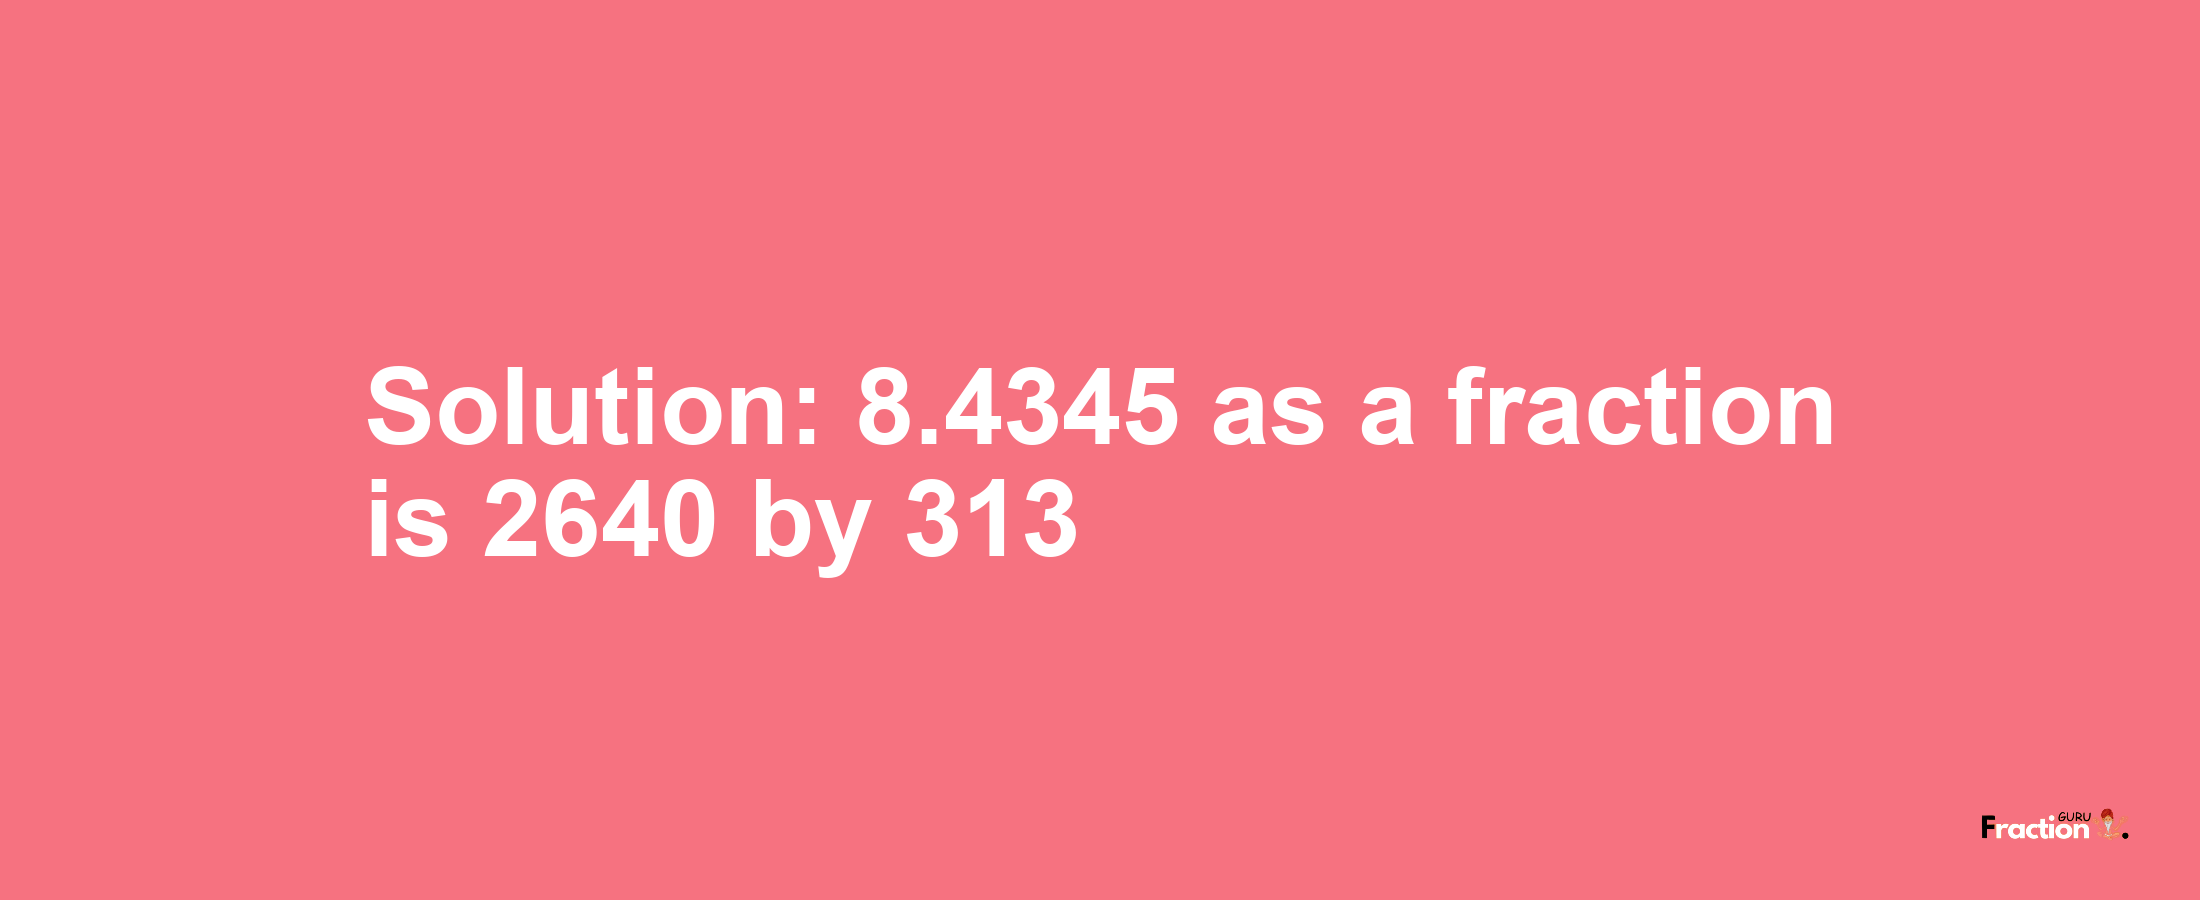 Solution:8.4345 as a fraction is 2640/313